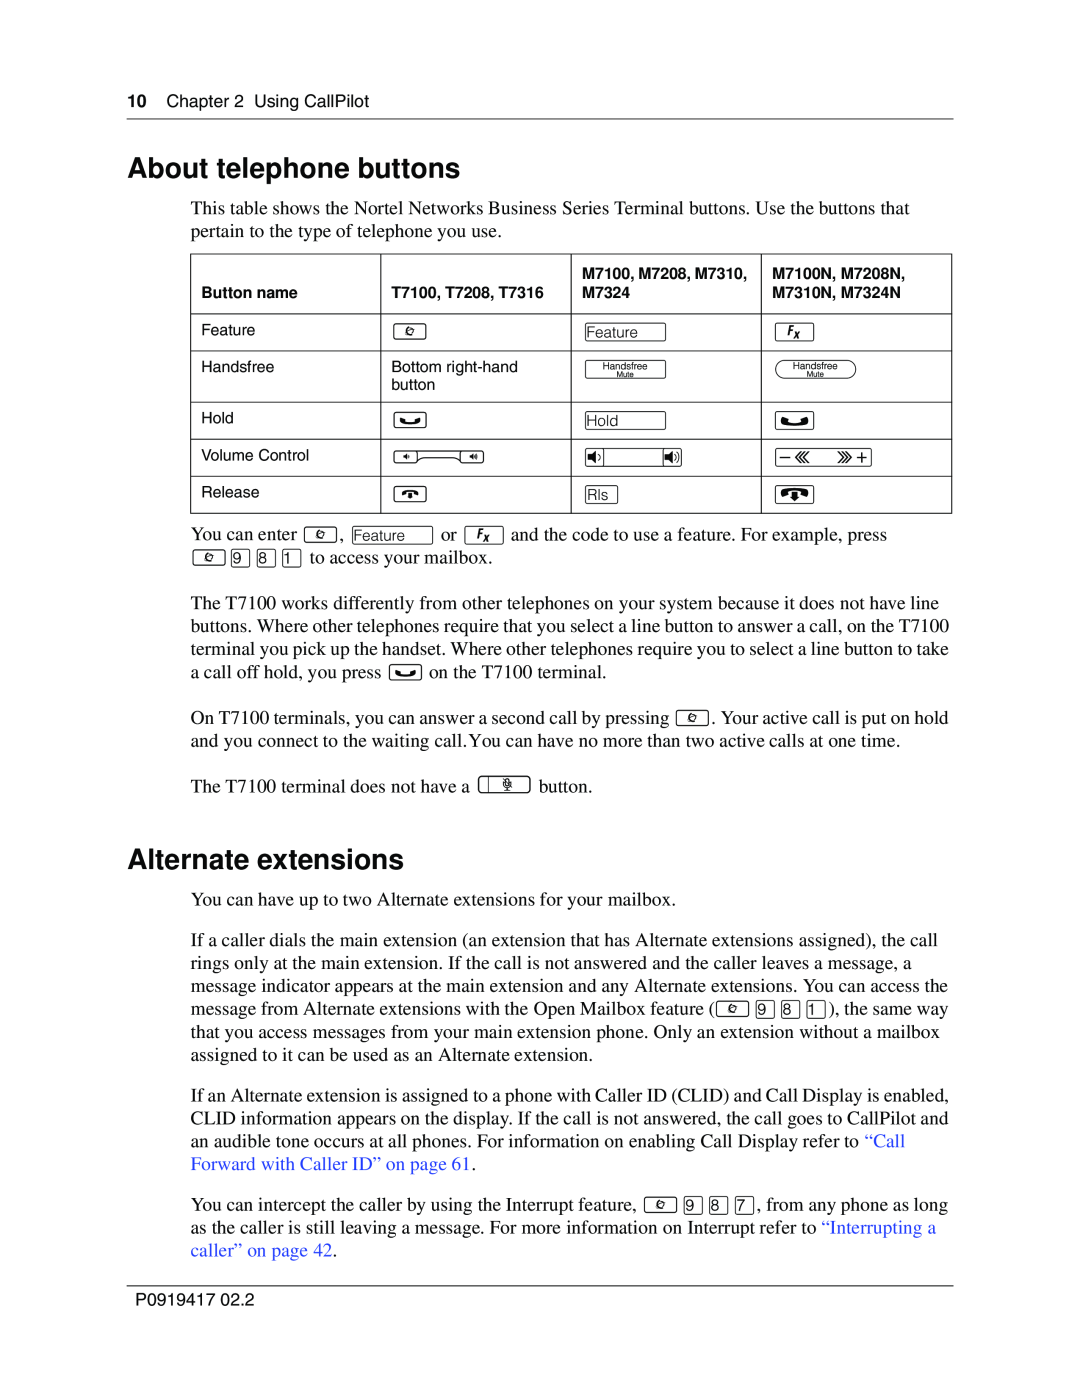 Nortel Networks CallPilot manual About telephone buttons, Alternate extensions 